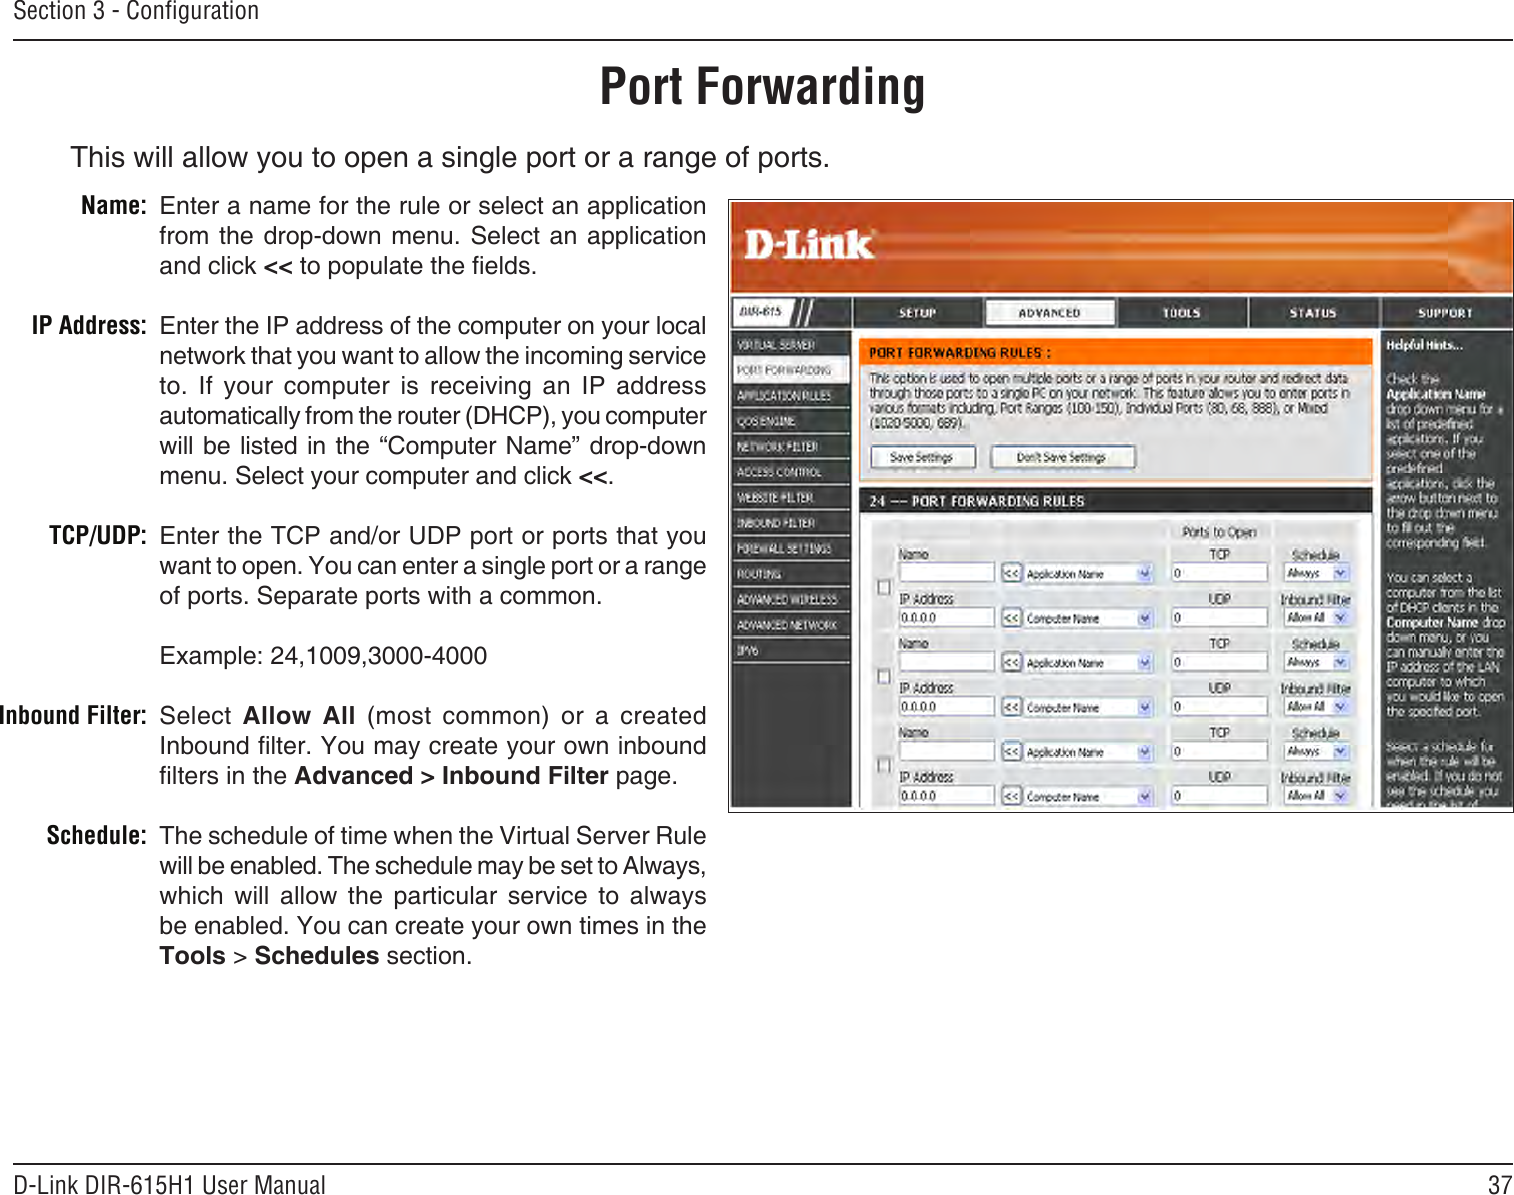 37D-Link DIR-615H1 User ManualSection 3 - CongurationThis will allow you to open a single port or a range of ports.Port ForwardingEnter a name for the rule or select an application from the drop-down menu. Select  an  application and click &lt;&lt; to populate the elds.Enter the IP address of the computer on your local network that you want to allow the incoming service to.  If  your  computer  is  receiving  an  IP  address automatically from the router (DHCP), you computer will be listed in the “Computer Name” drop-down menu. Select your computer and click &lt;&lt;. Enter the TCP and/or UDP port or ports that you want to open. You can enter a single port or a range of ports. Separate ports with a common.Example: 24,1009,3000-4000Select  Allow  All  (most  common)  or  a  created Inbound lter. You may create your own inbound lters in the Advanced &gt; Inbound Filter page.The schedule of time when the Virtual Server Rule will be enabled. The schedule may be set to Always, which  will  allow  the  particular  service  to  always be enabled. You can create your own times in the  Tools &gt; Schedules section.Name:IP Address:TCP/UDP:Inbound Filter:Schedule: